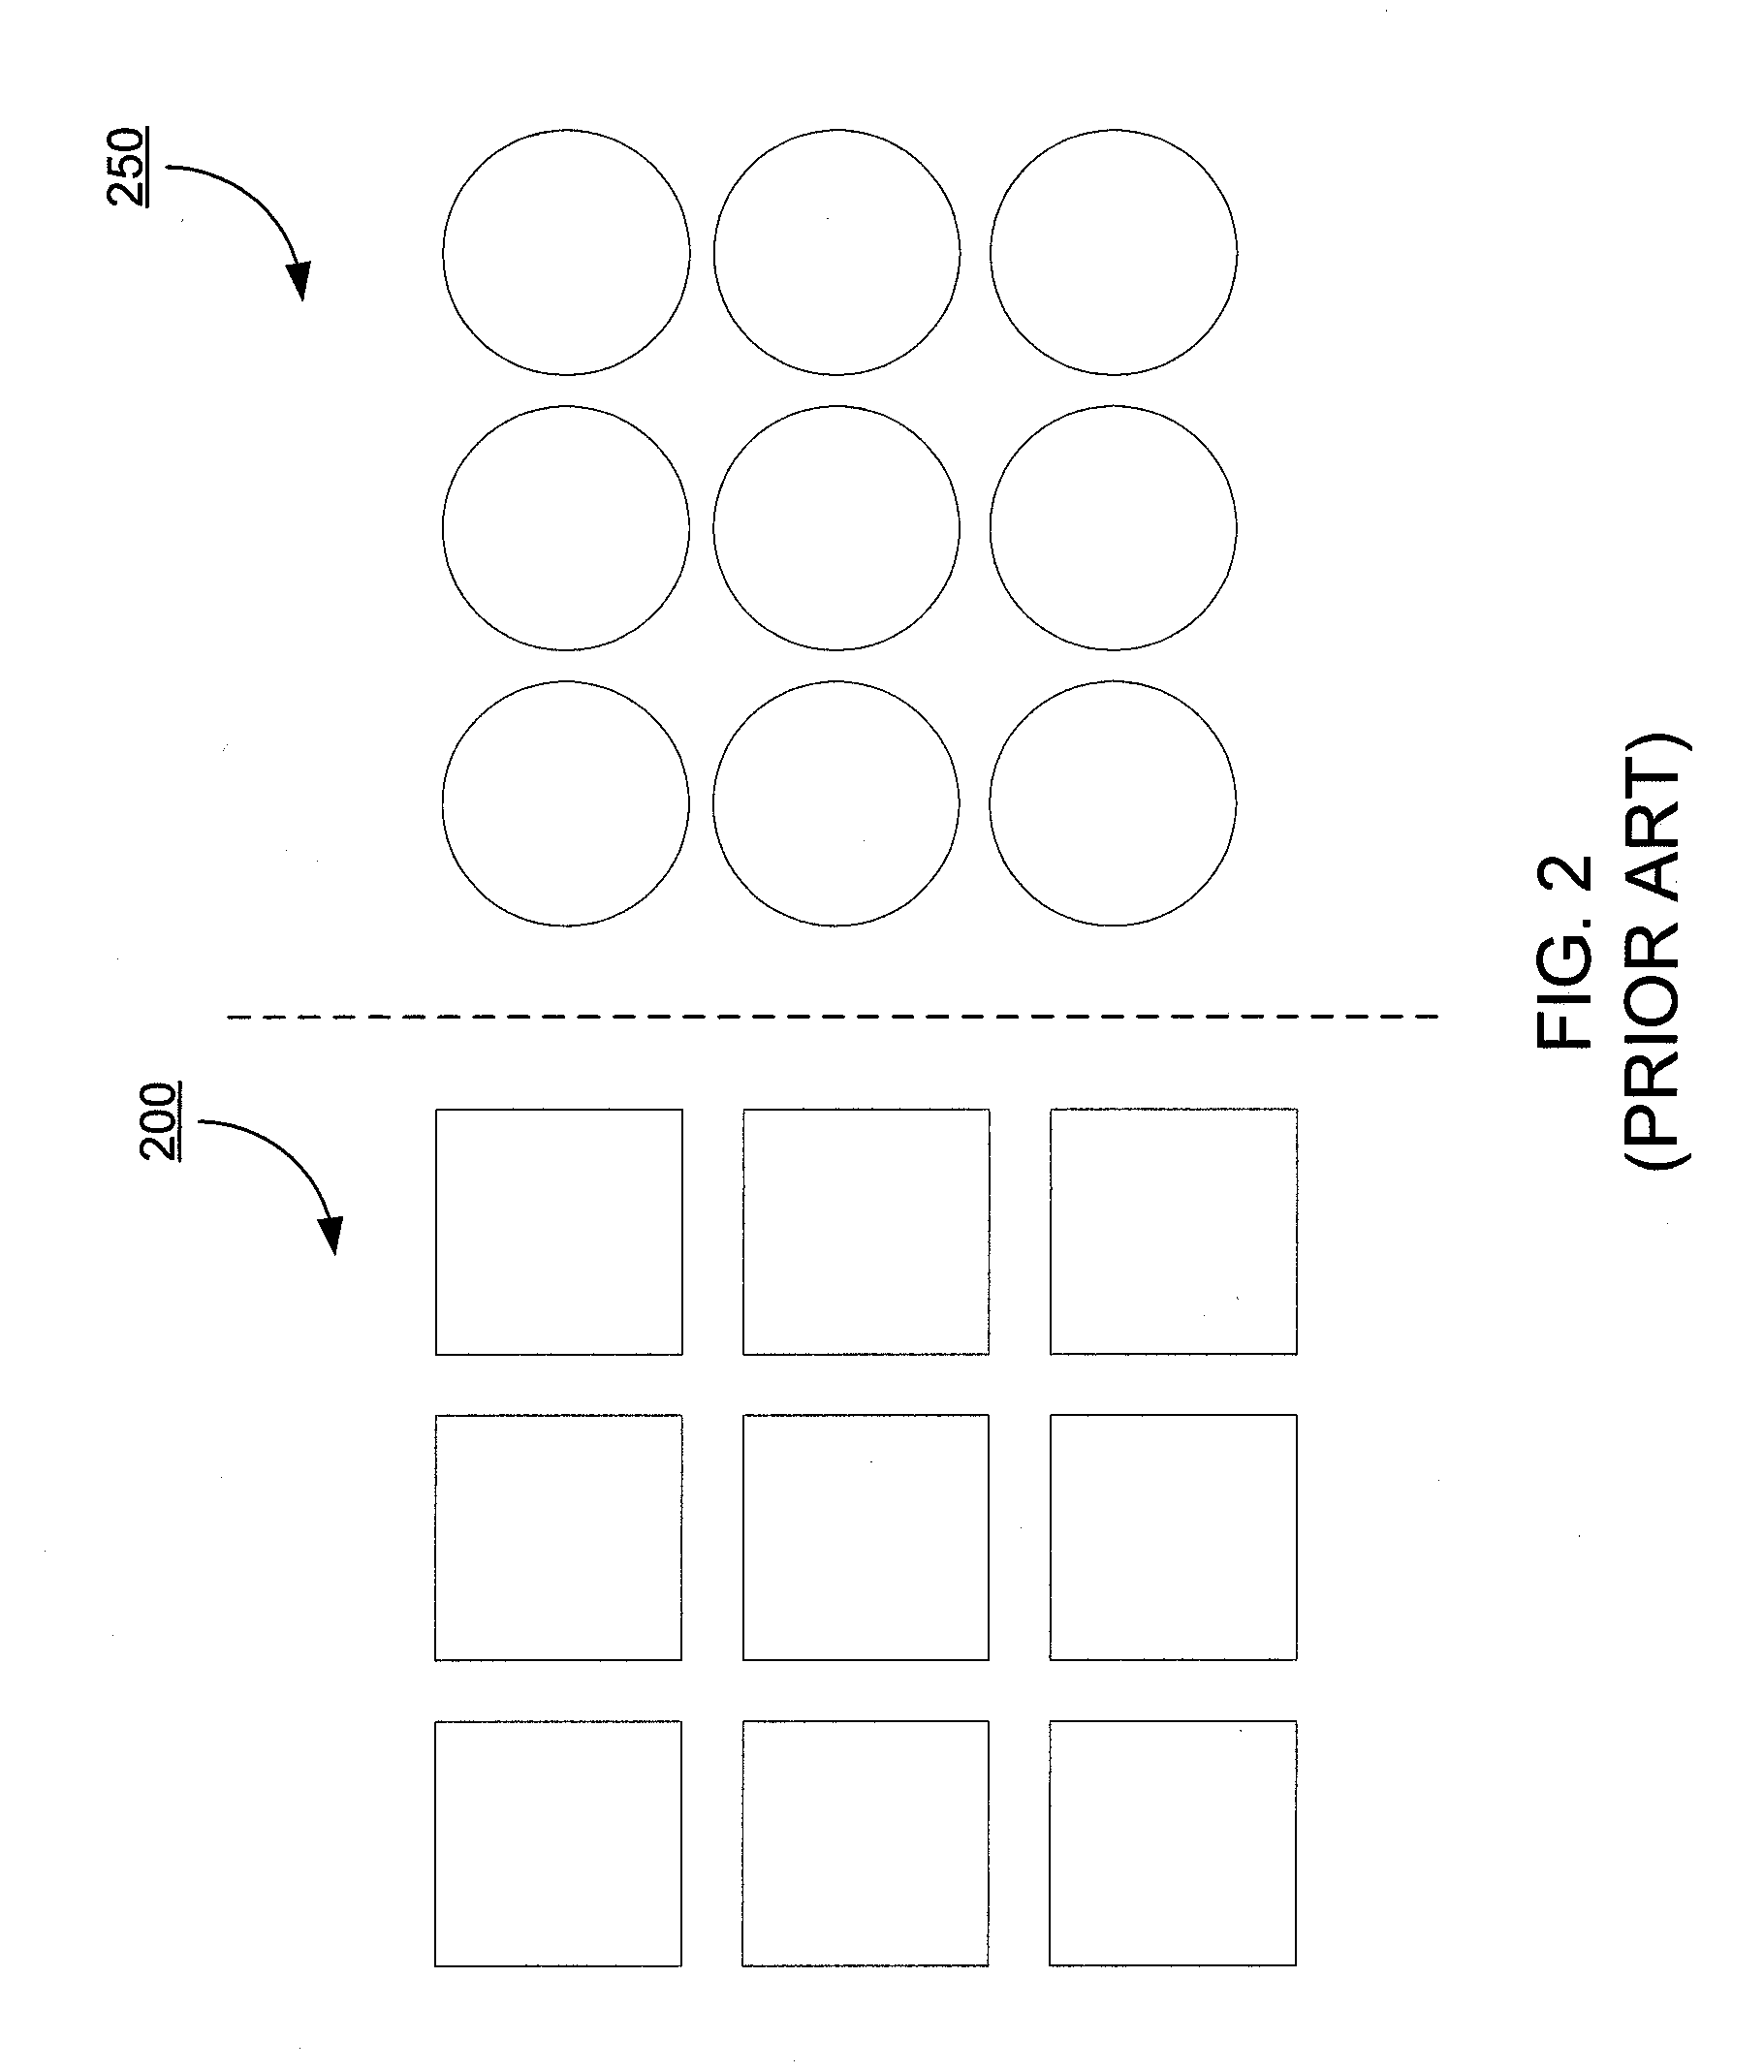 Alternating, complementary conductive element pattern for multi-touch sensor